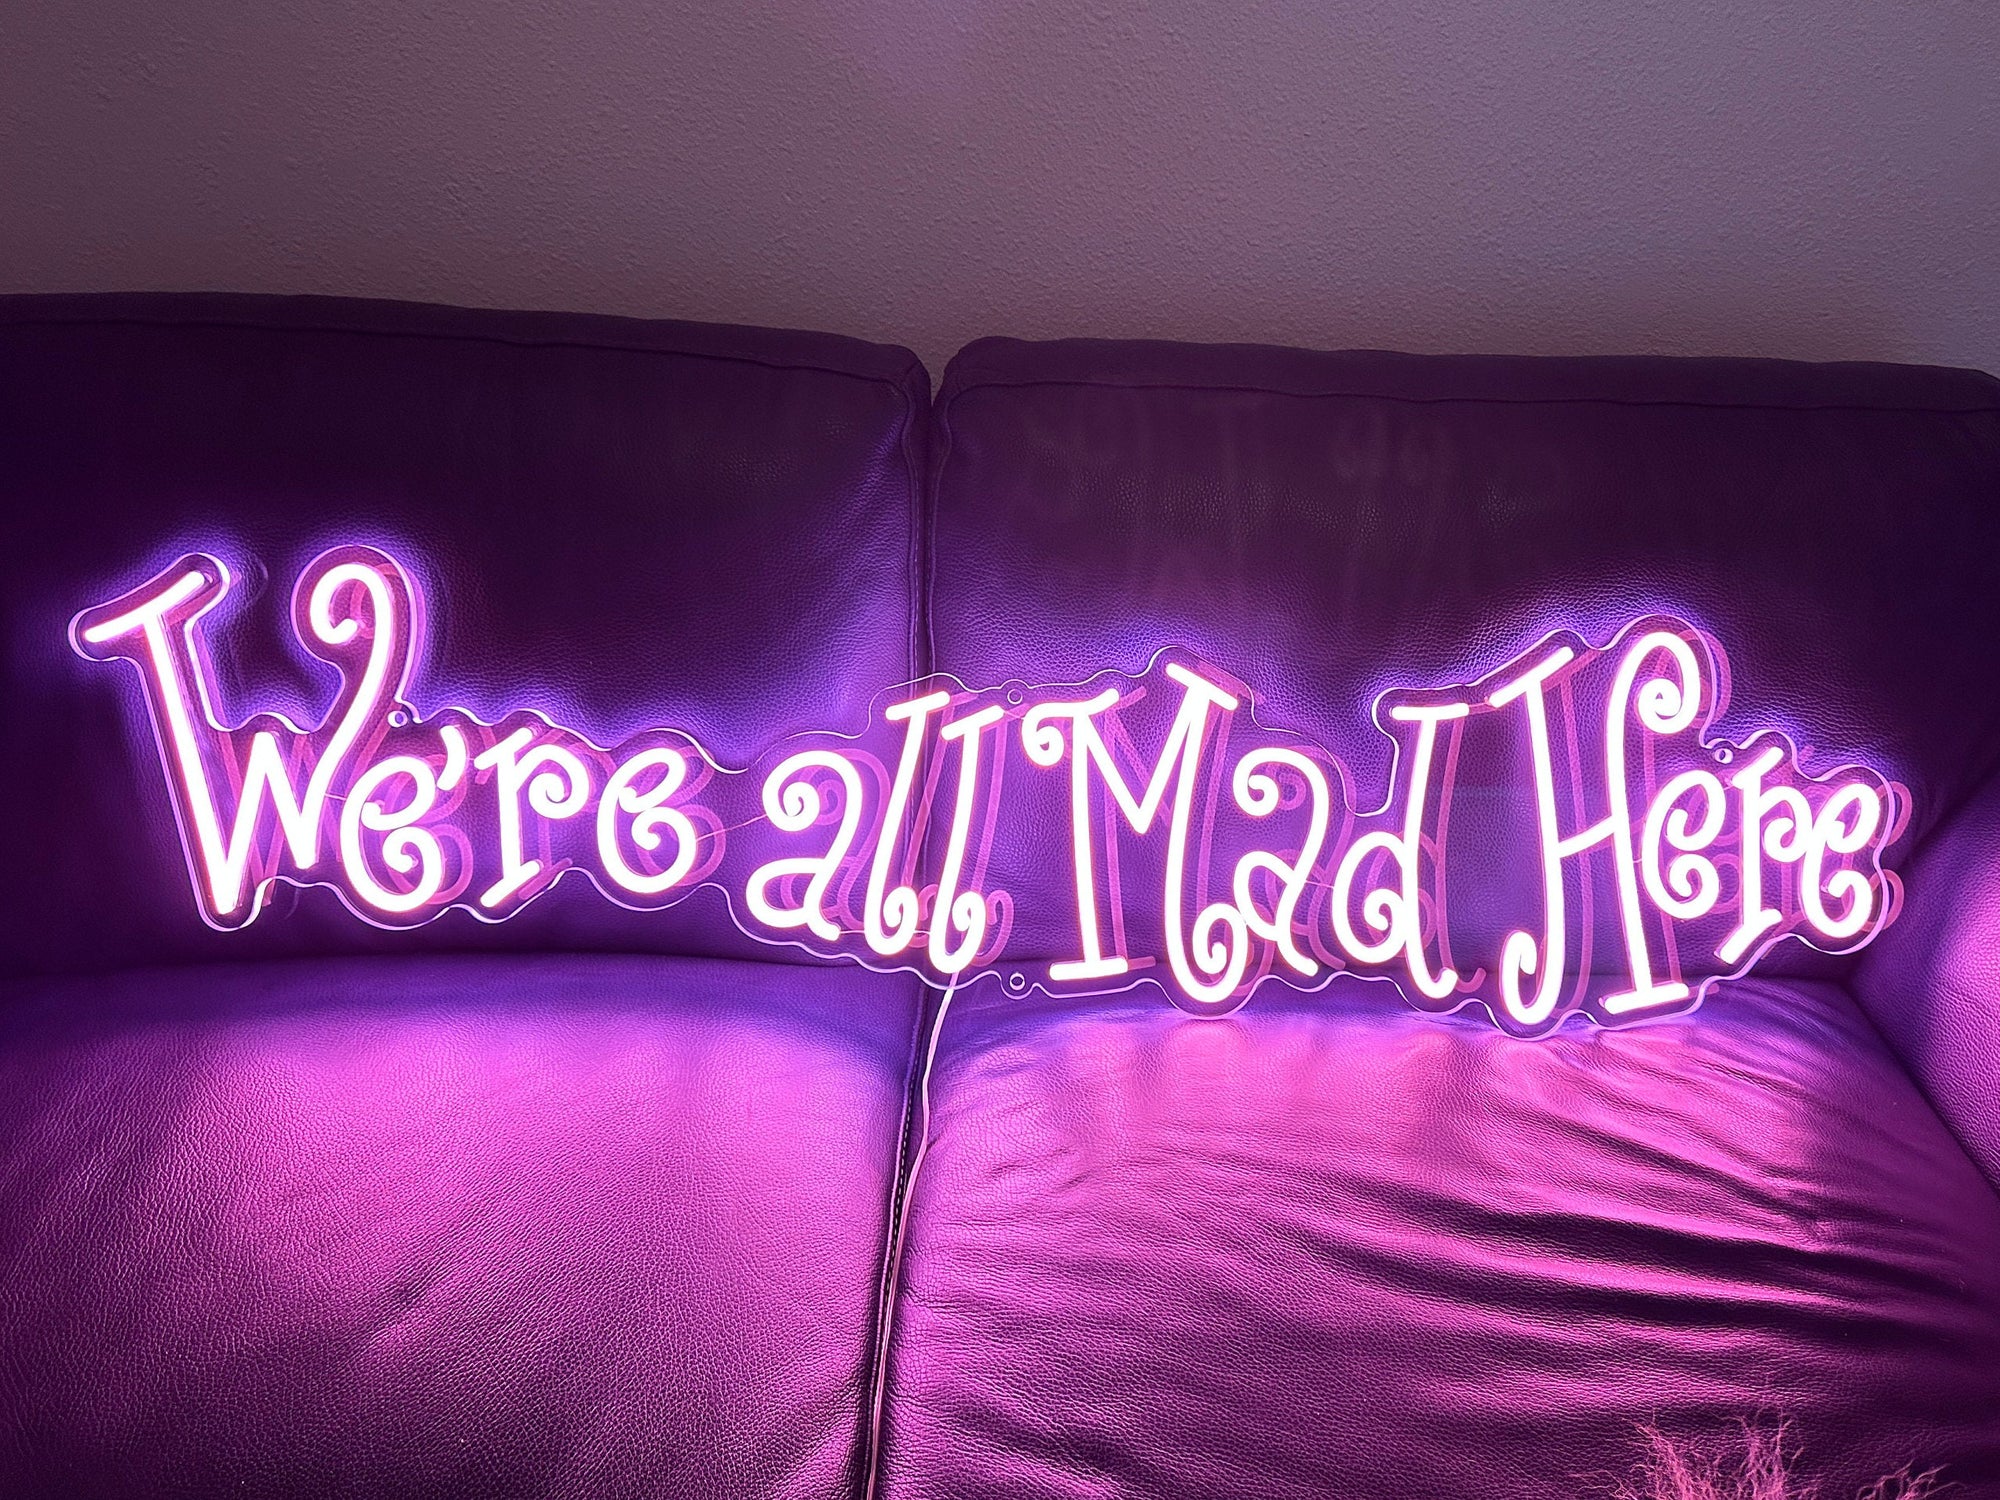 We're All Mad Here LED Neon Signs, Cute Home Decor Art Gift for Her, Wonderland